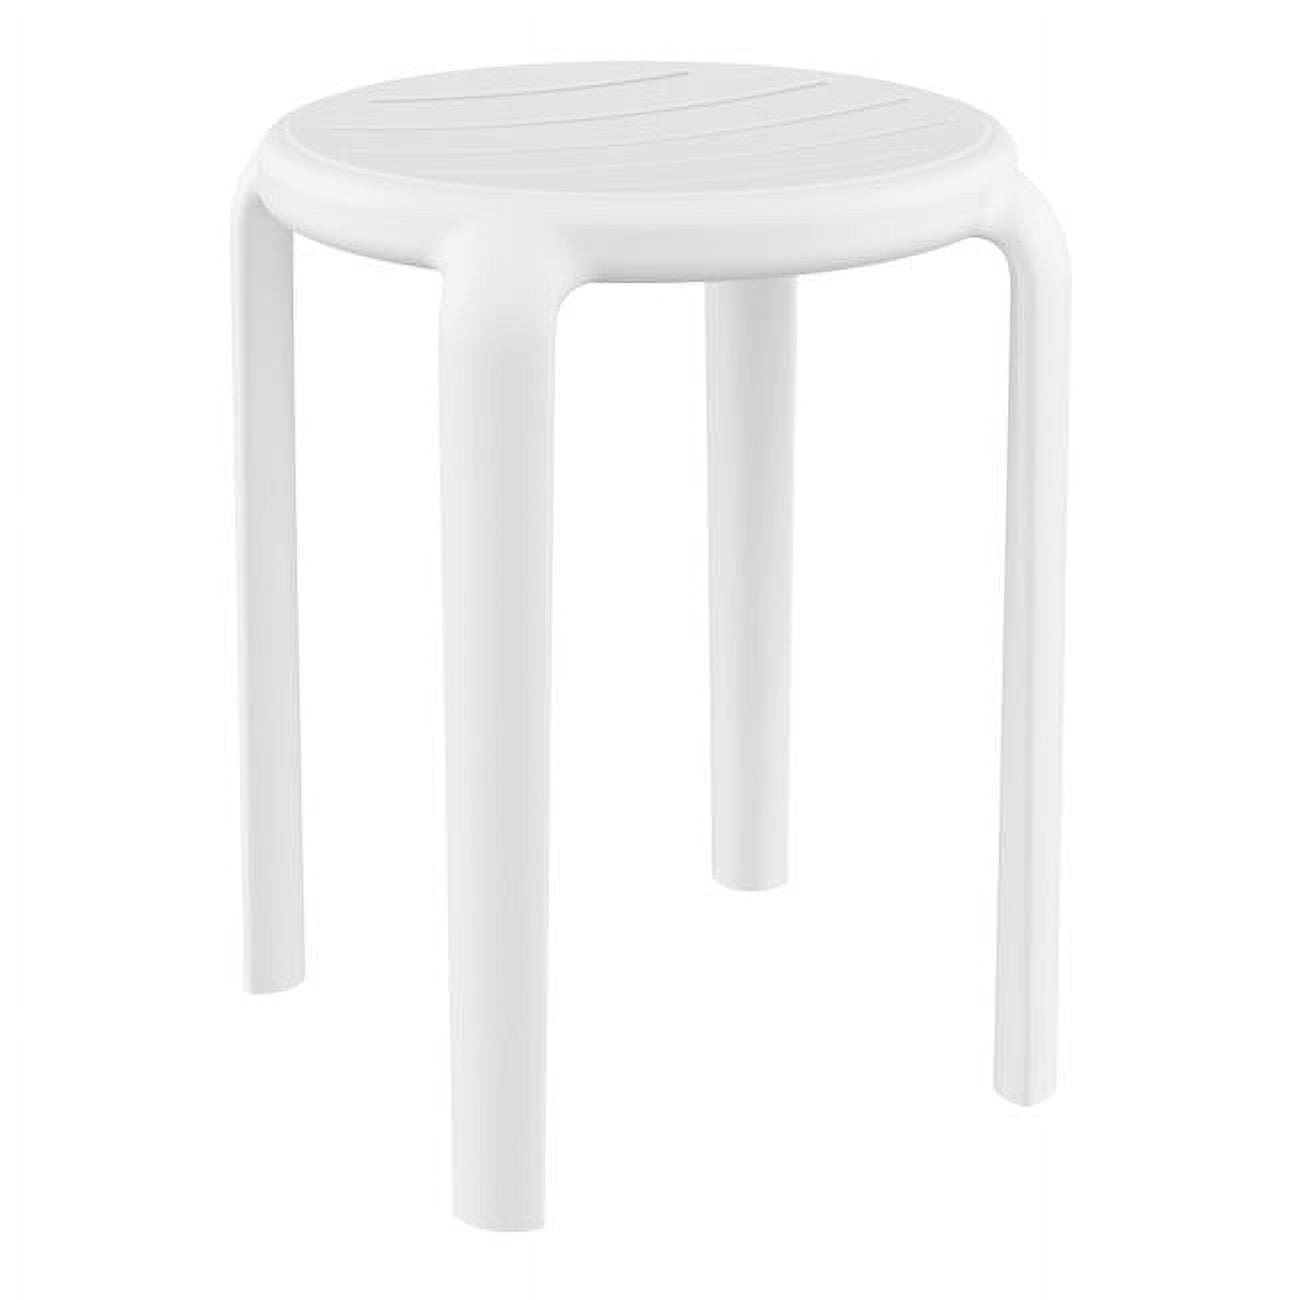 Picture of Siesta ISP286-WHI 17.7 x 13.3 x 13.3 in. Tom Resin Dining Stool - White - Pack of 2